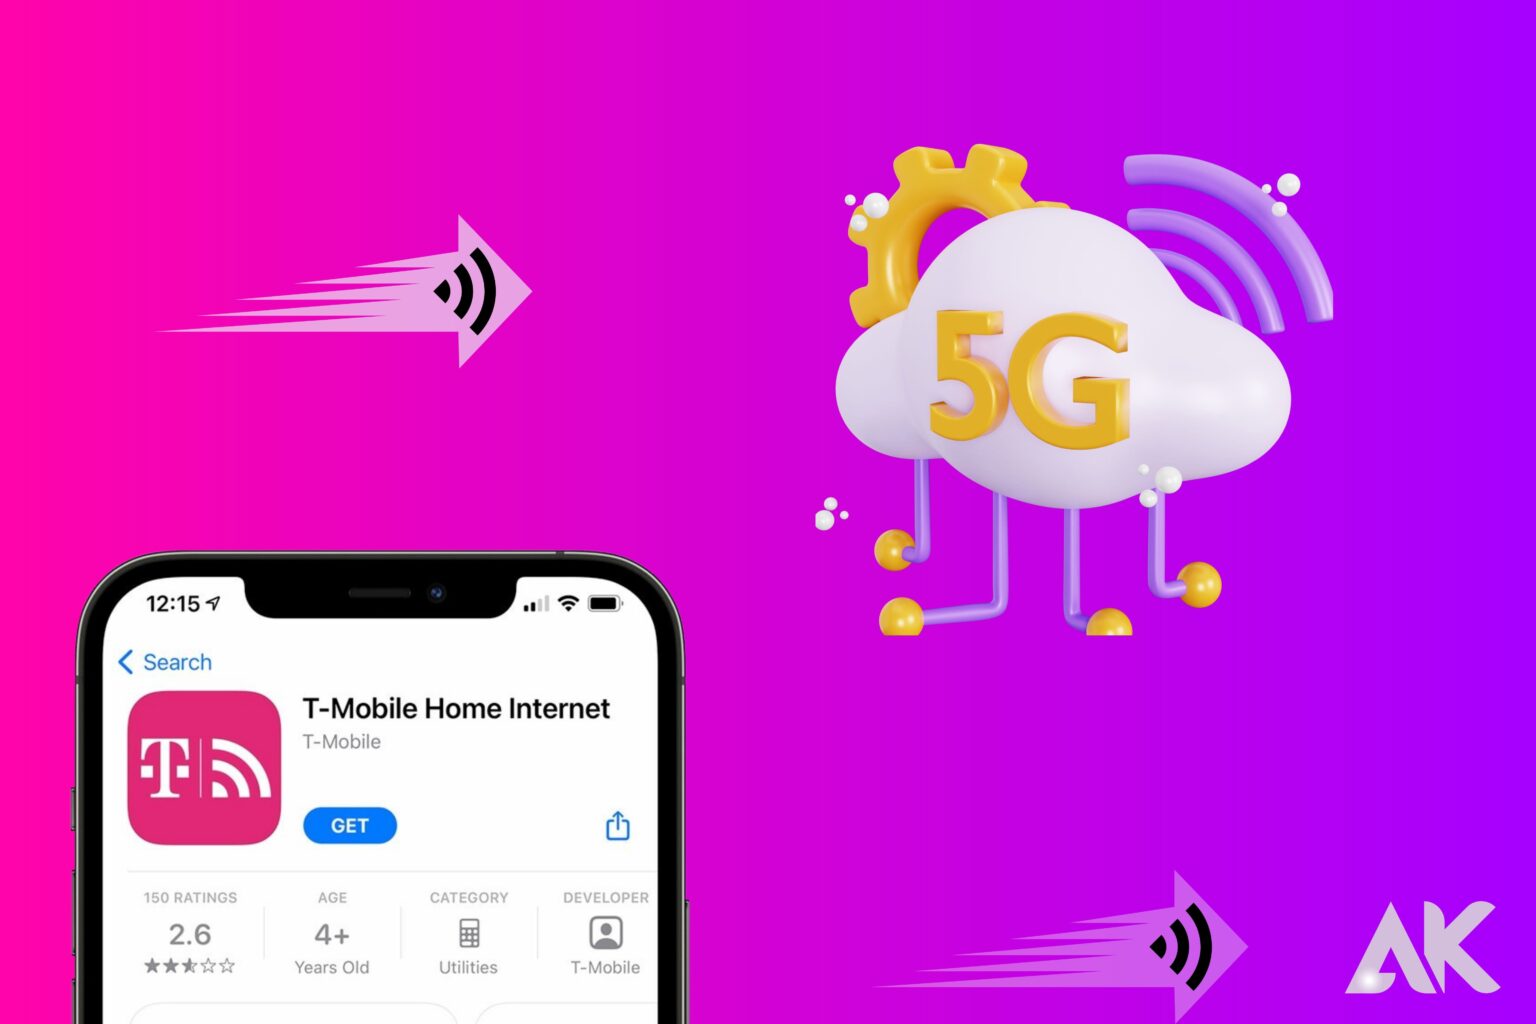 How to Make T-Mobile Home Internet Faster?